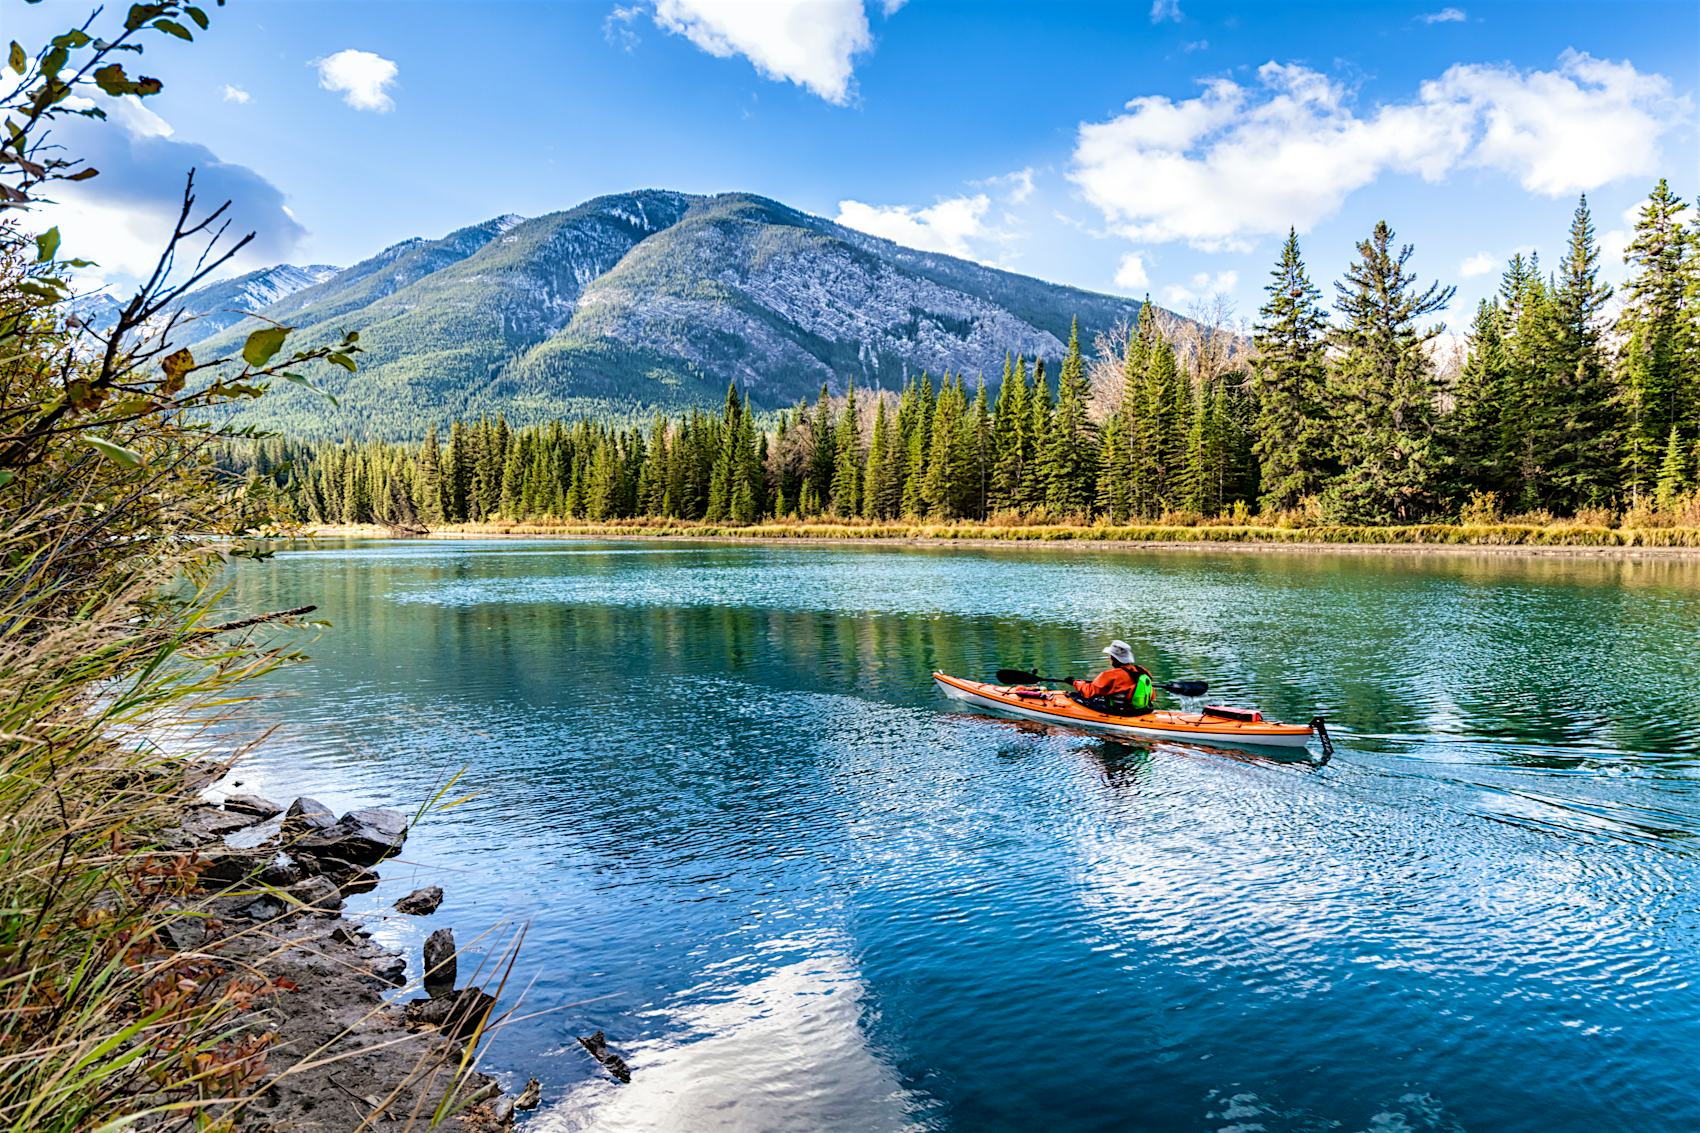 Kayaker on the Bow River near Banff, Canada